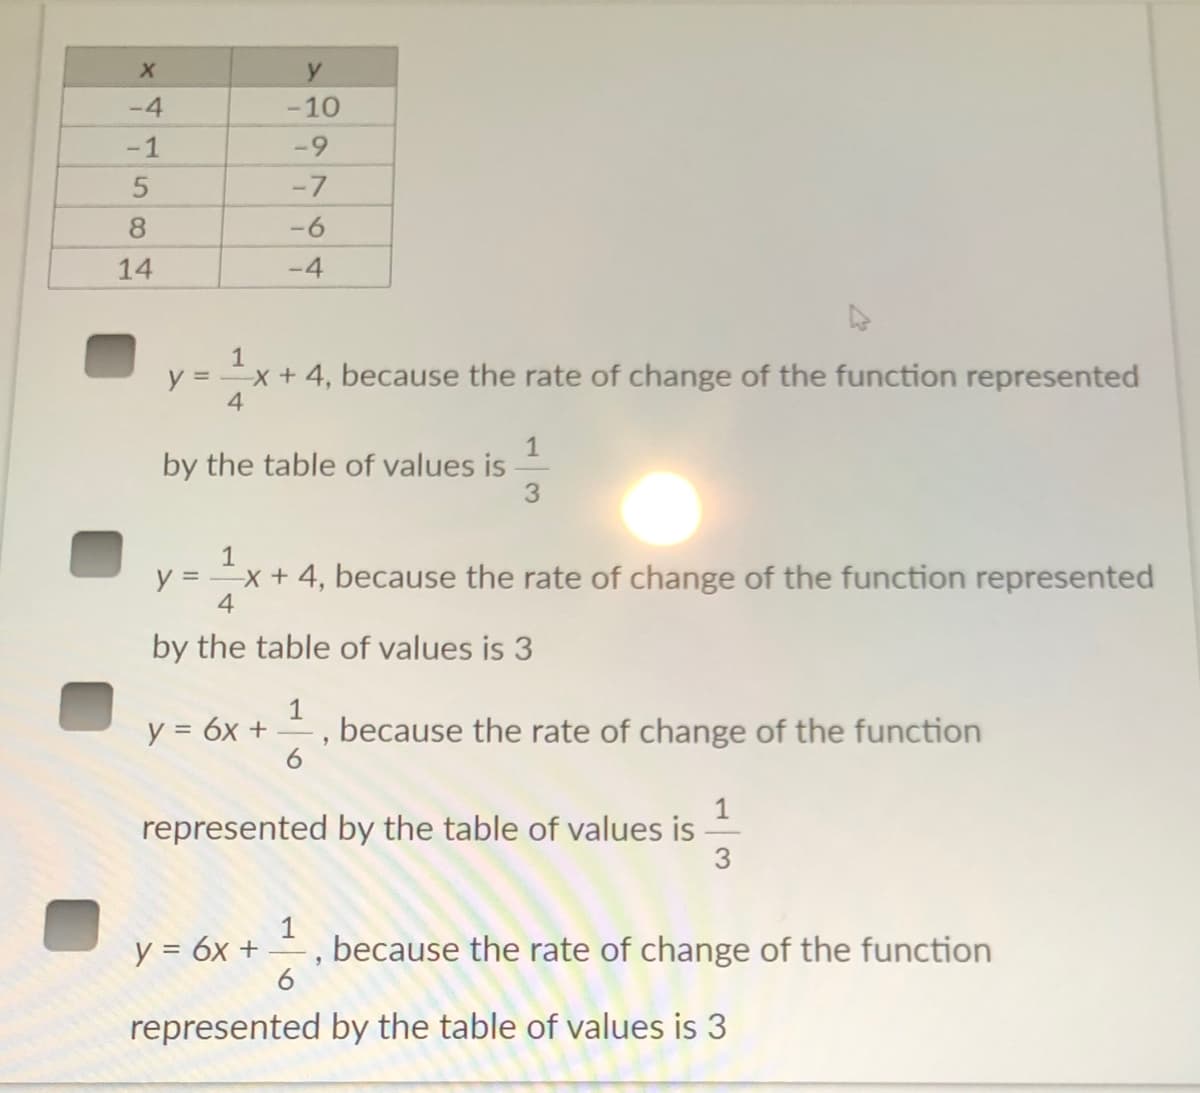 y
-4
-10
-1
-9
-7
8
-6
14
-4
1
y = x + 4, because the rate of change of the function represented
1
by the table of values is
3.
1
y = x + 4, because the rate of change of the function represented
4
by the table of values is 3
1
because the rate of change of the function
6.
y = 6x +
1
represented by the table of values is
3
1
because the rate of change of the function
6
y = 6x +
represented by the table of values is 3
